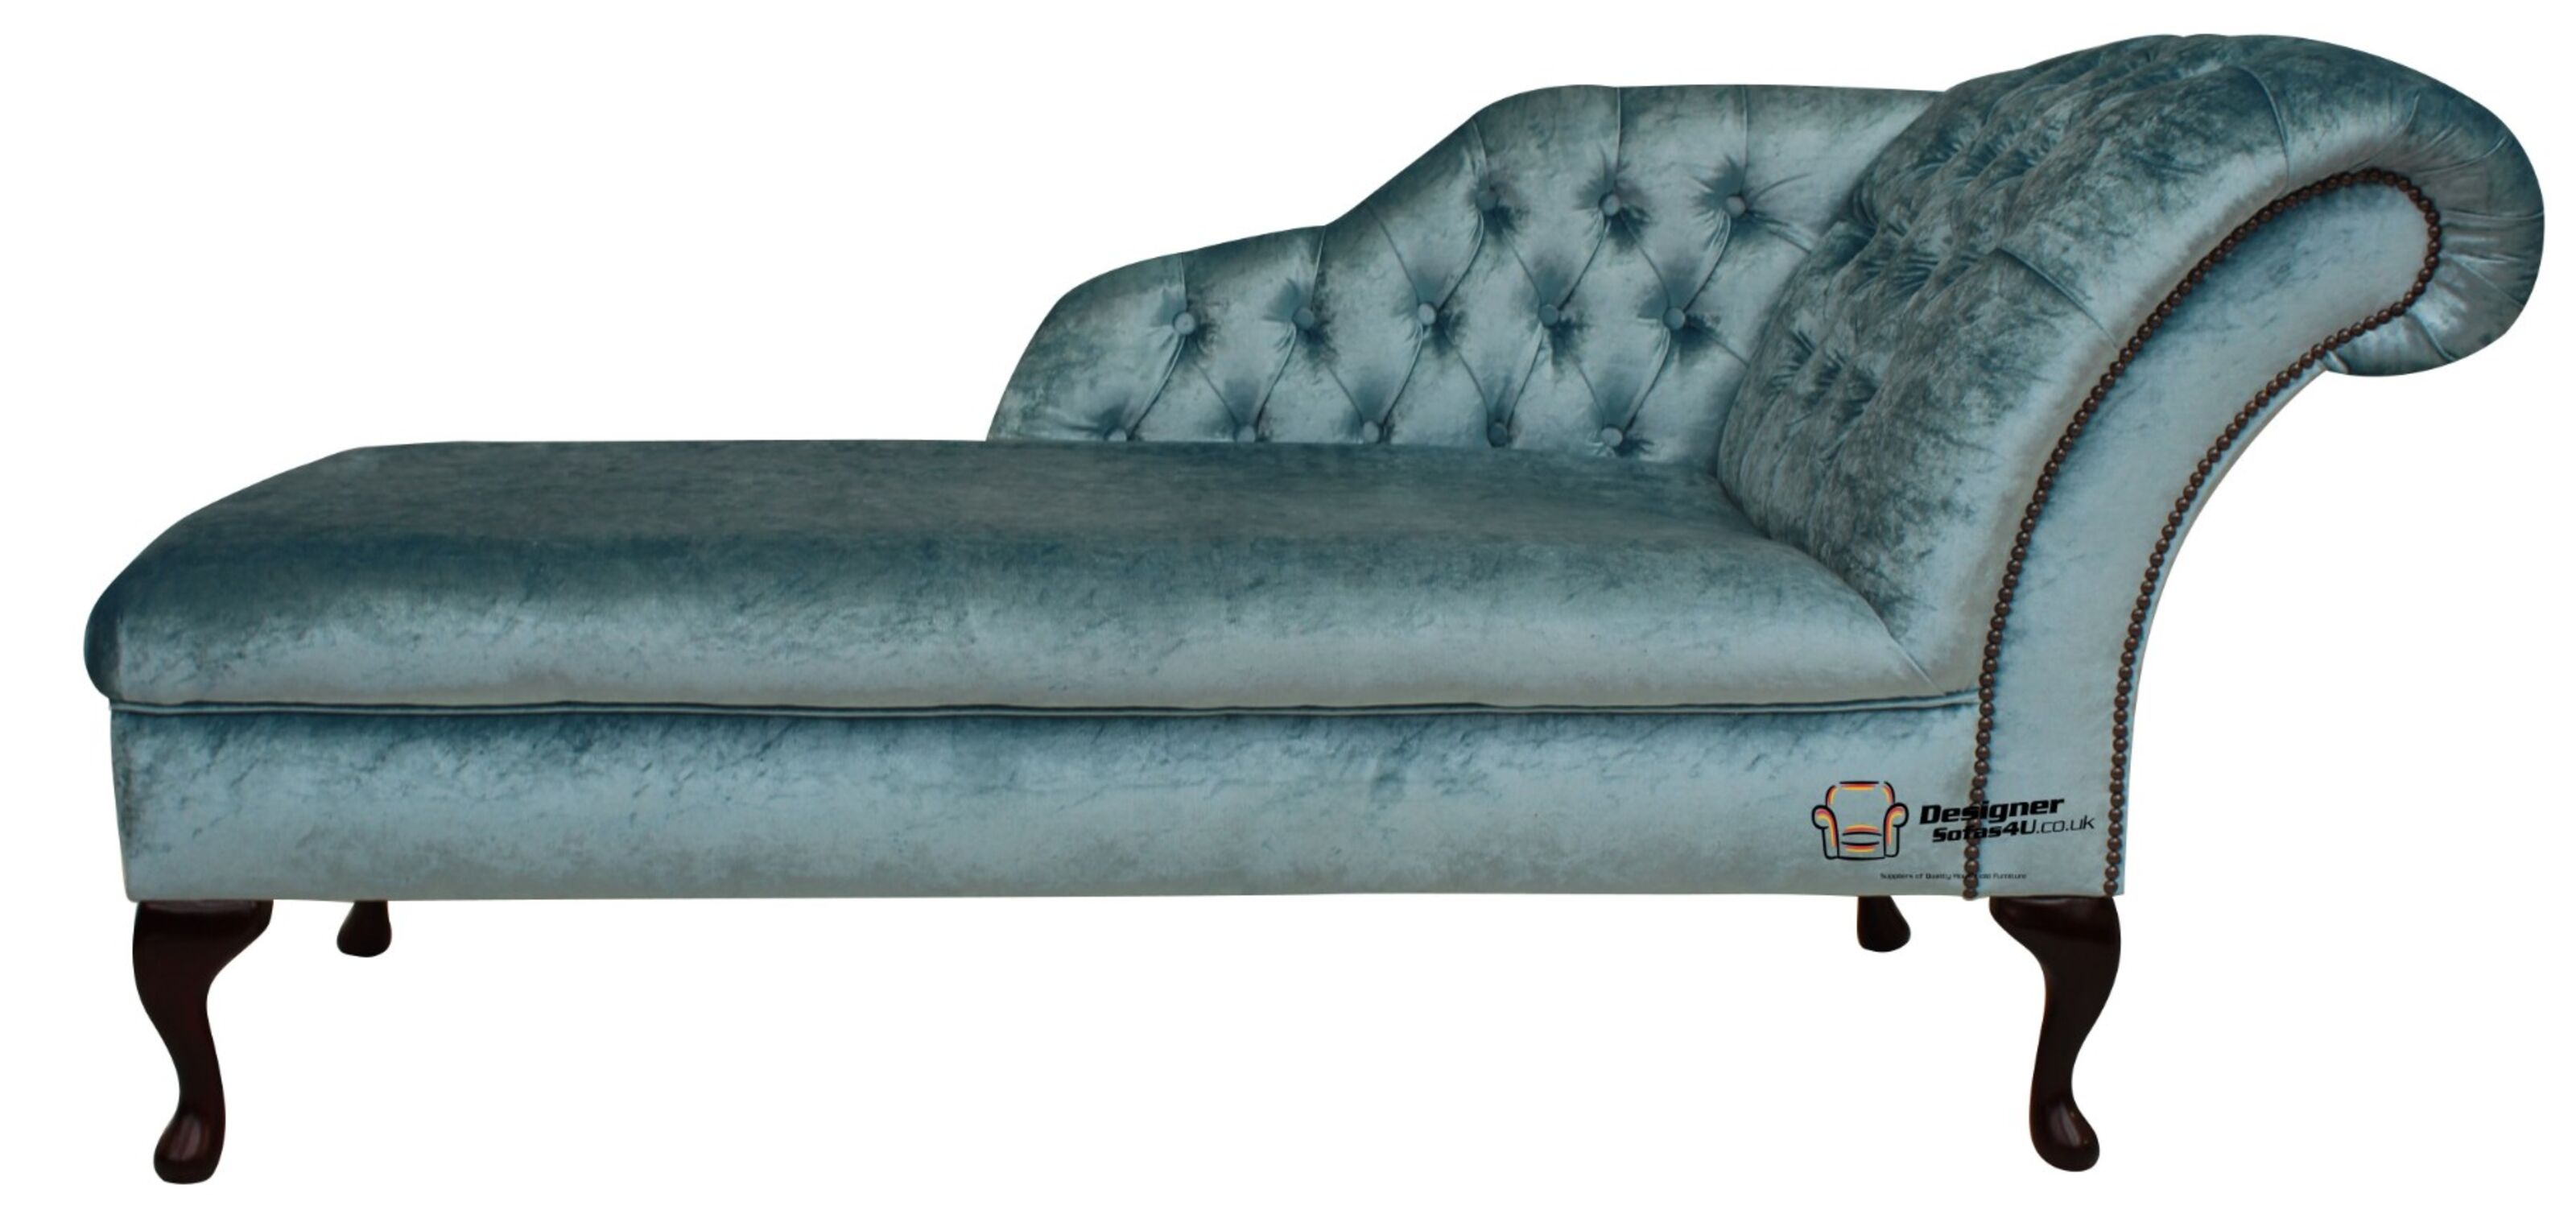 Luxurious Lounging Chesterfield Sofa with Chaise Options  %Post Title